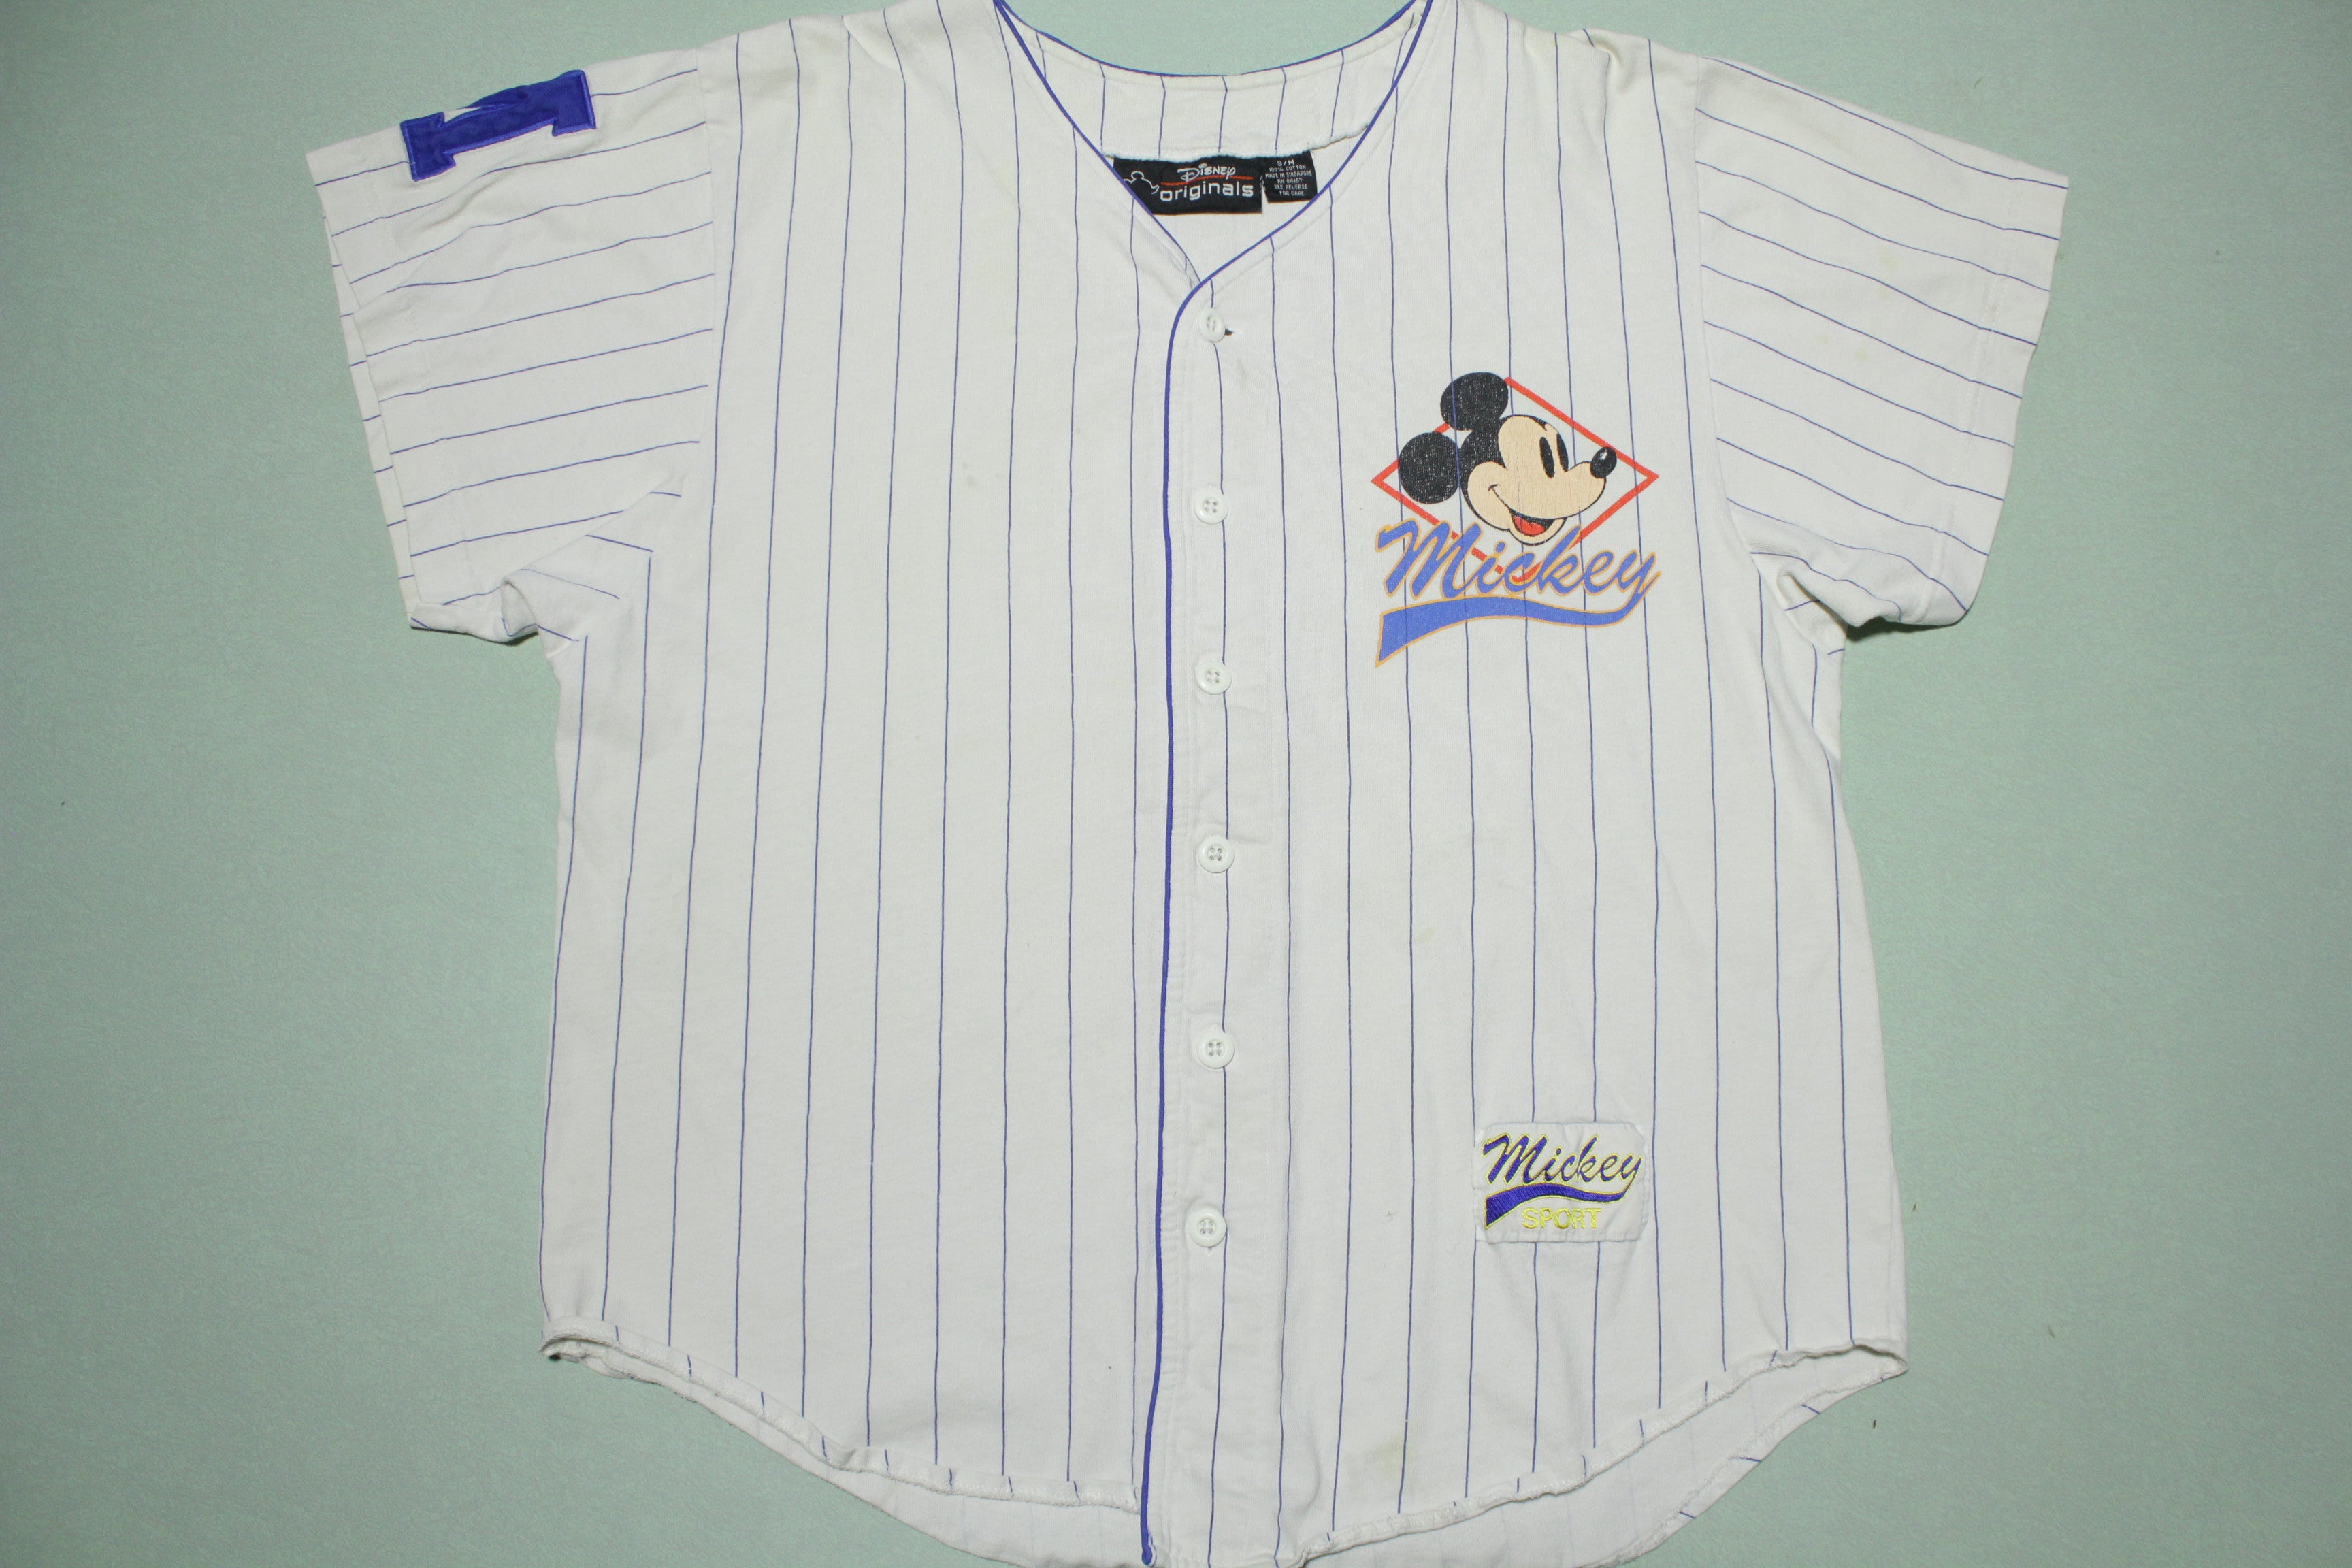 Vintage 70's / 80's New York Yankees pinstriped v-neck home jersey t-shirt.